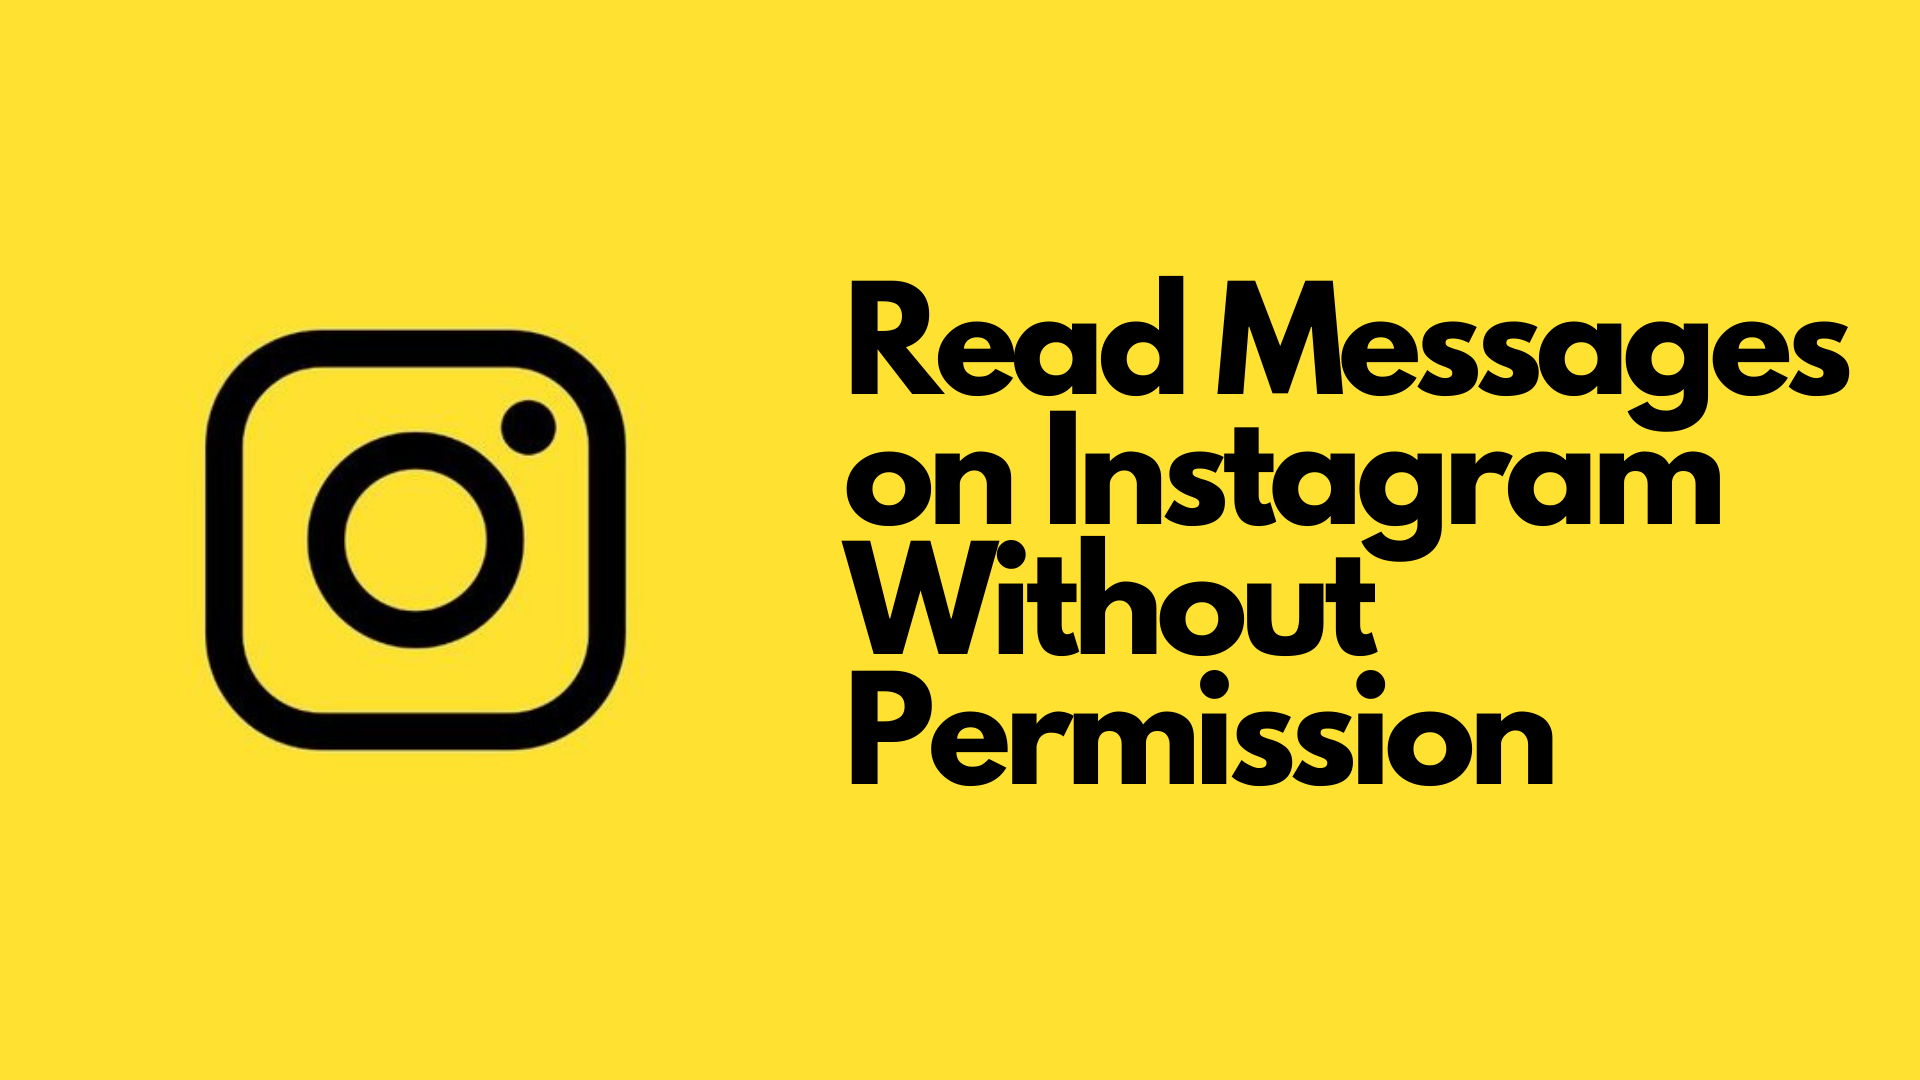 The Ultimate Guide to Instagram Spy Apps: How to Read Messages on Instagram Without Permission